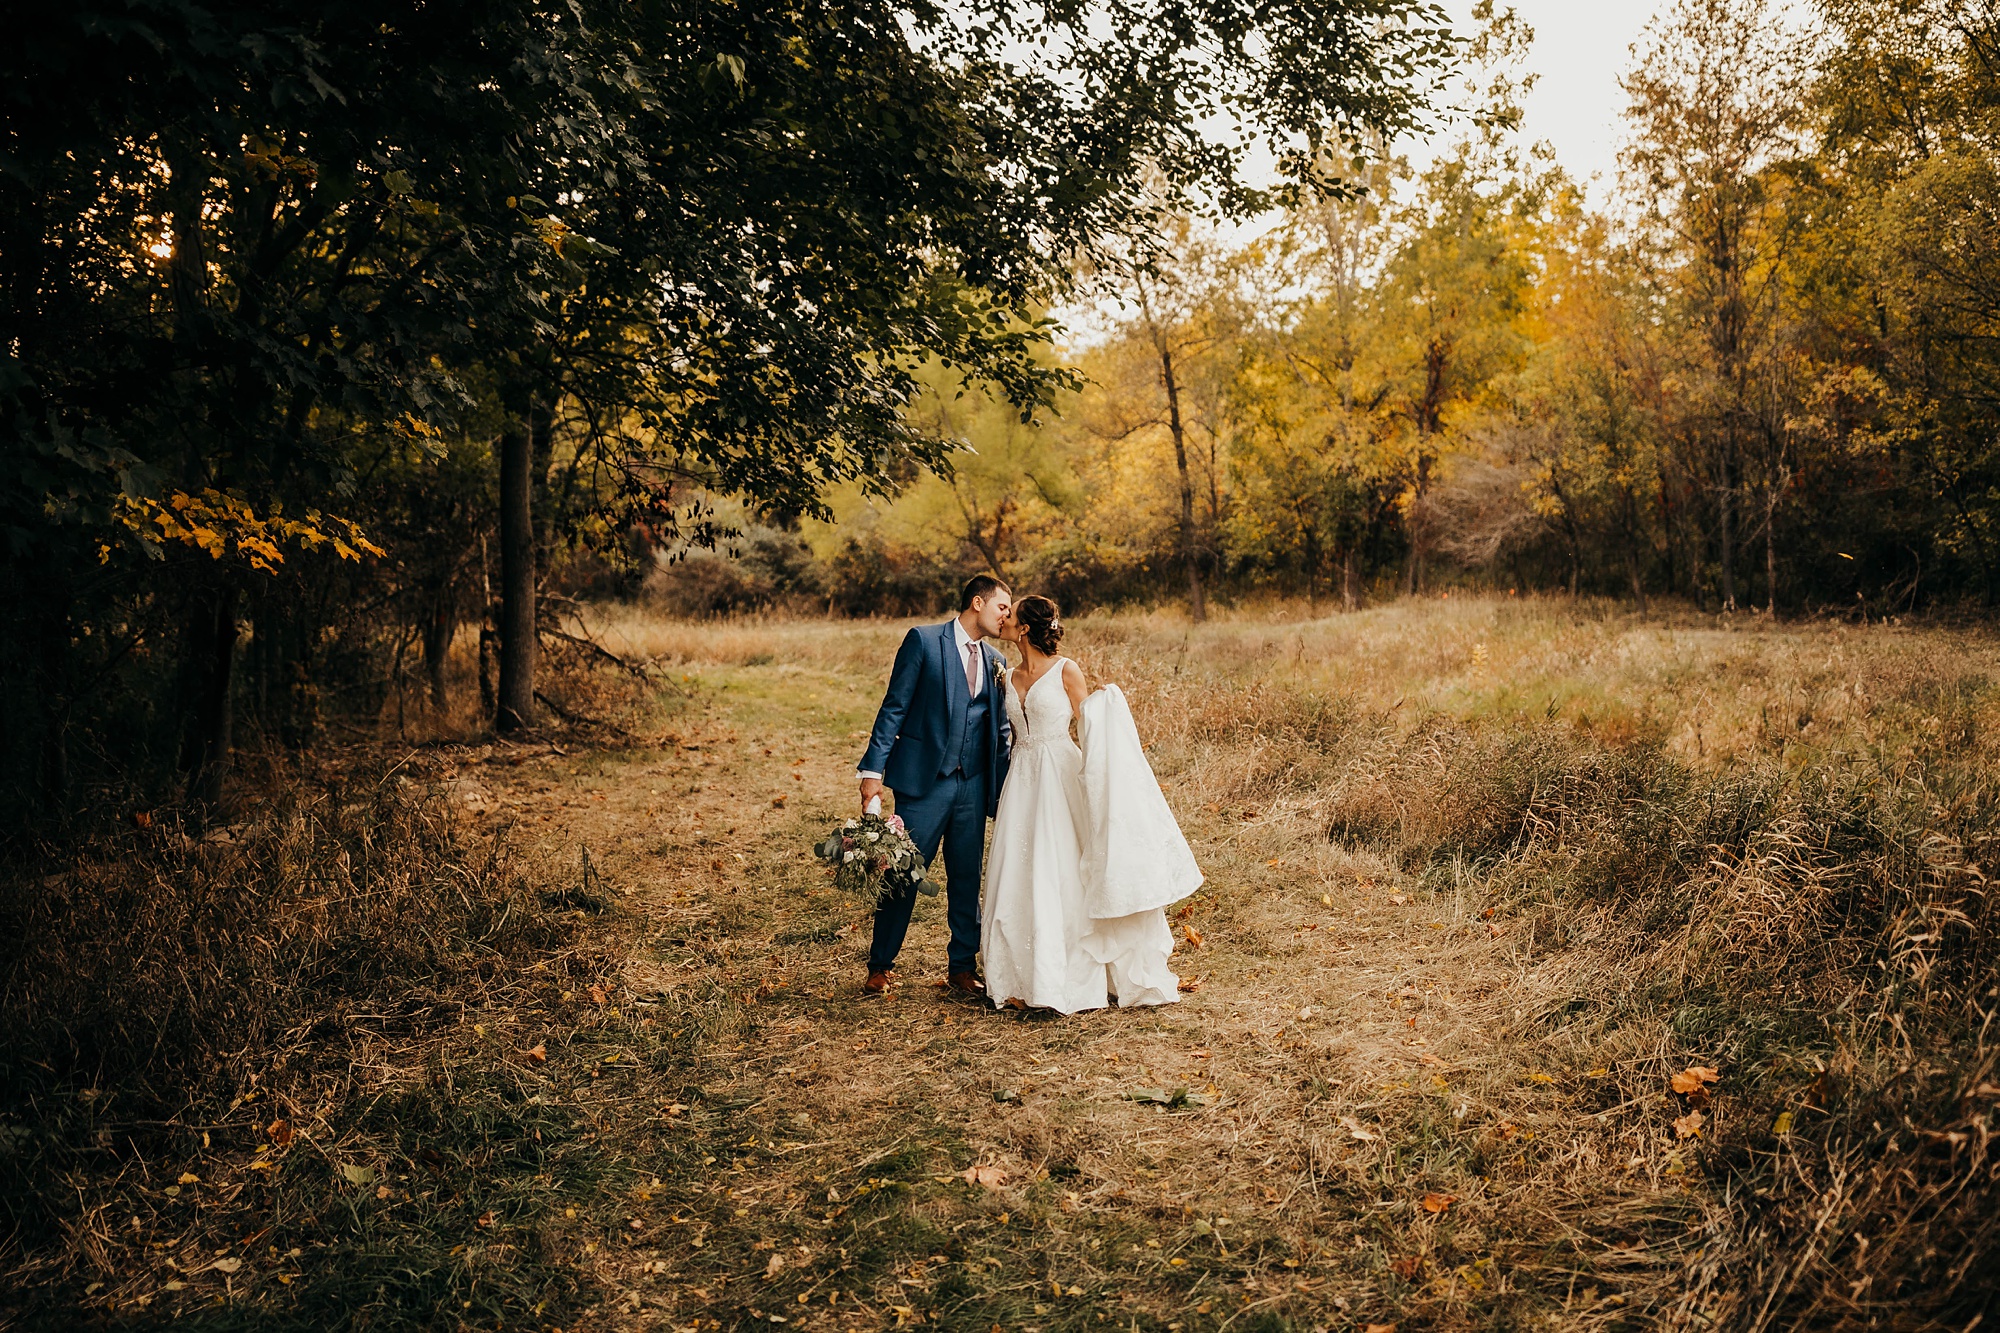 bride and groom kiss in field after elegant fall wedding in Ohio